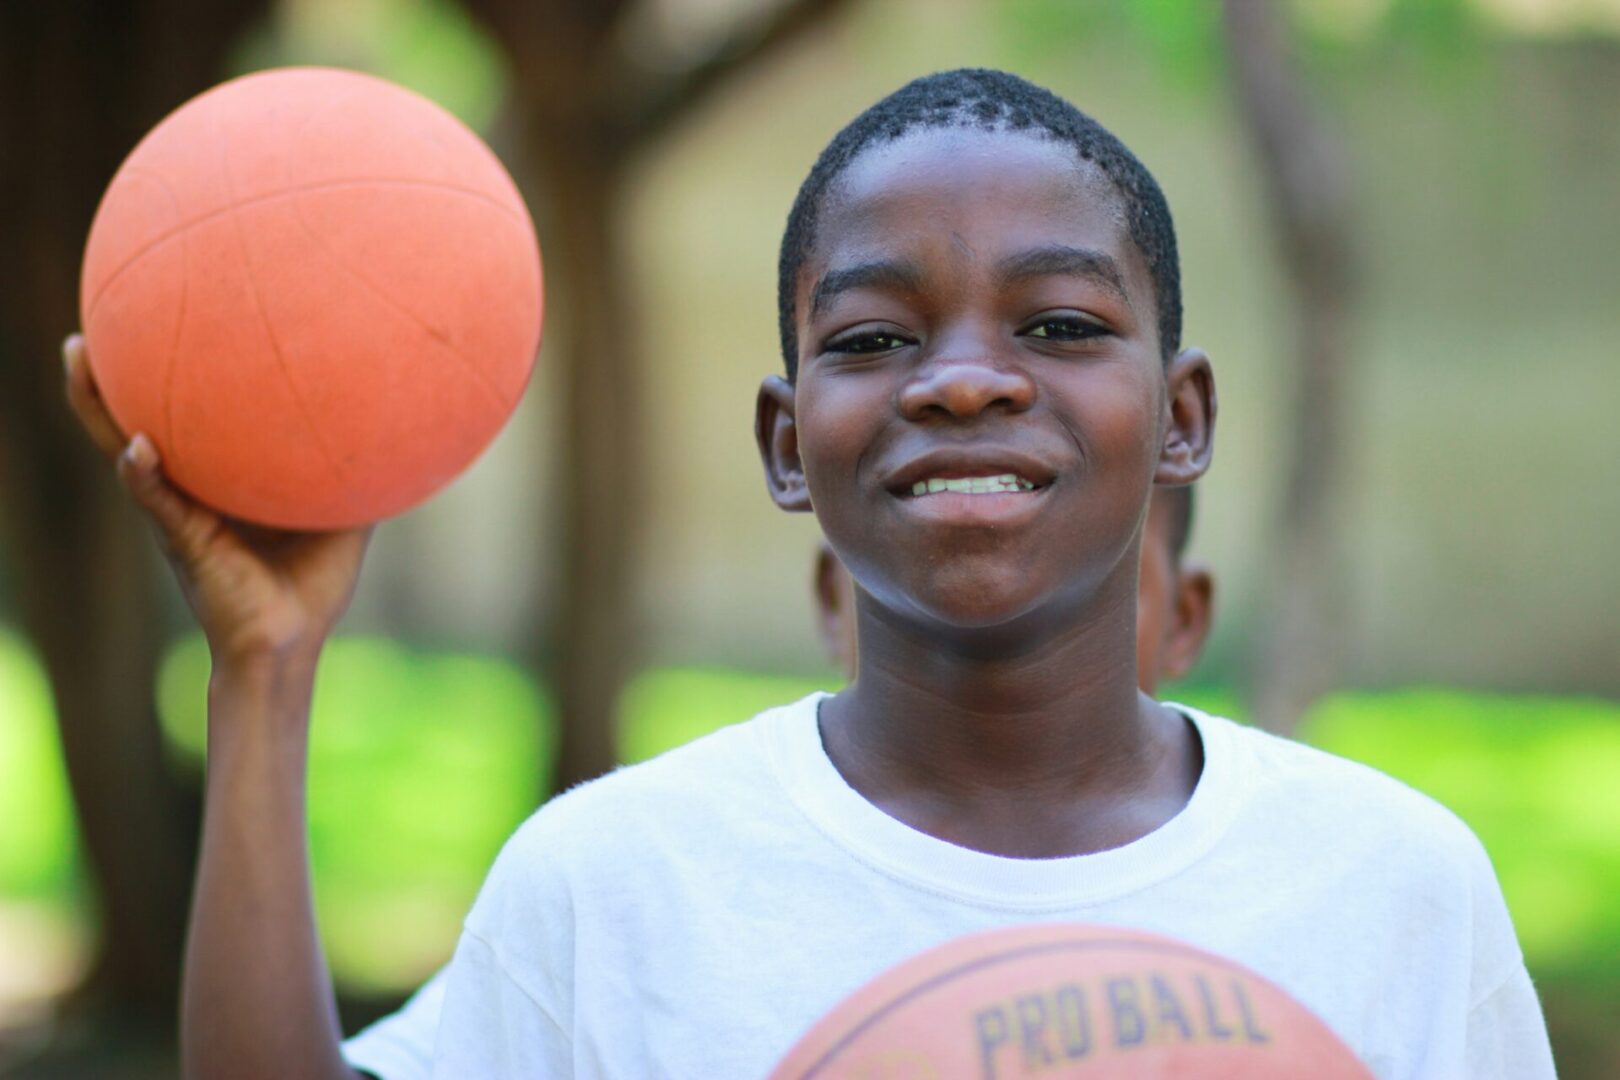 A small boy holding a basket ball and wearing a white tshirt.